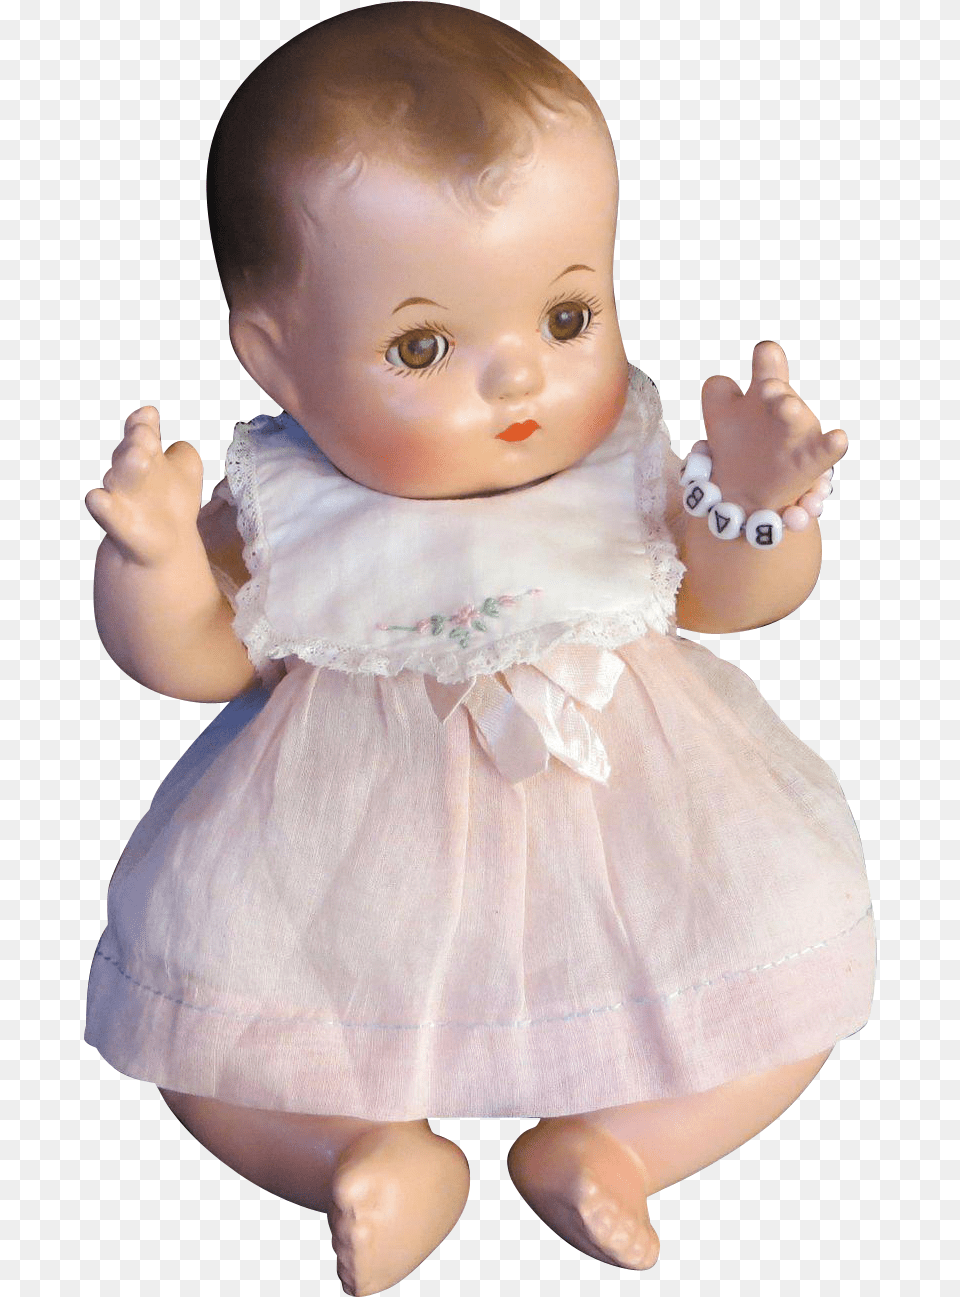 Doll Dollhouse Jc Toys La Newborn Scary Dolls Background, Toy, Baby, Person, Face Free Png Download